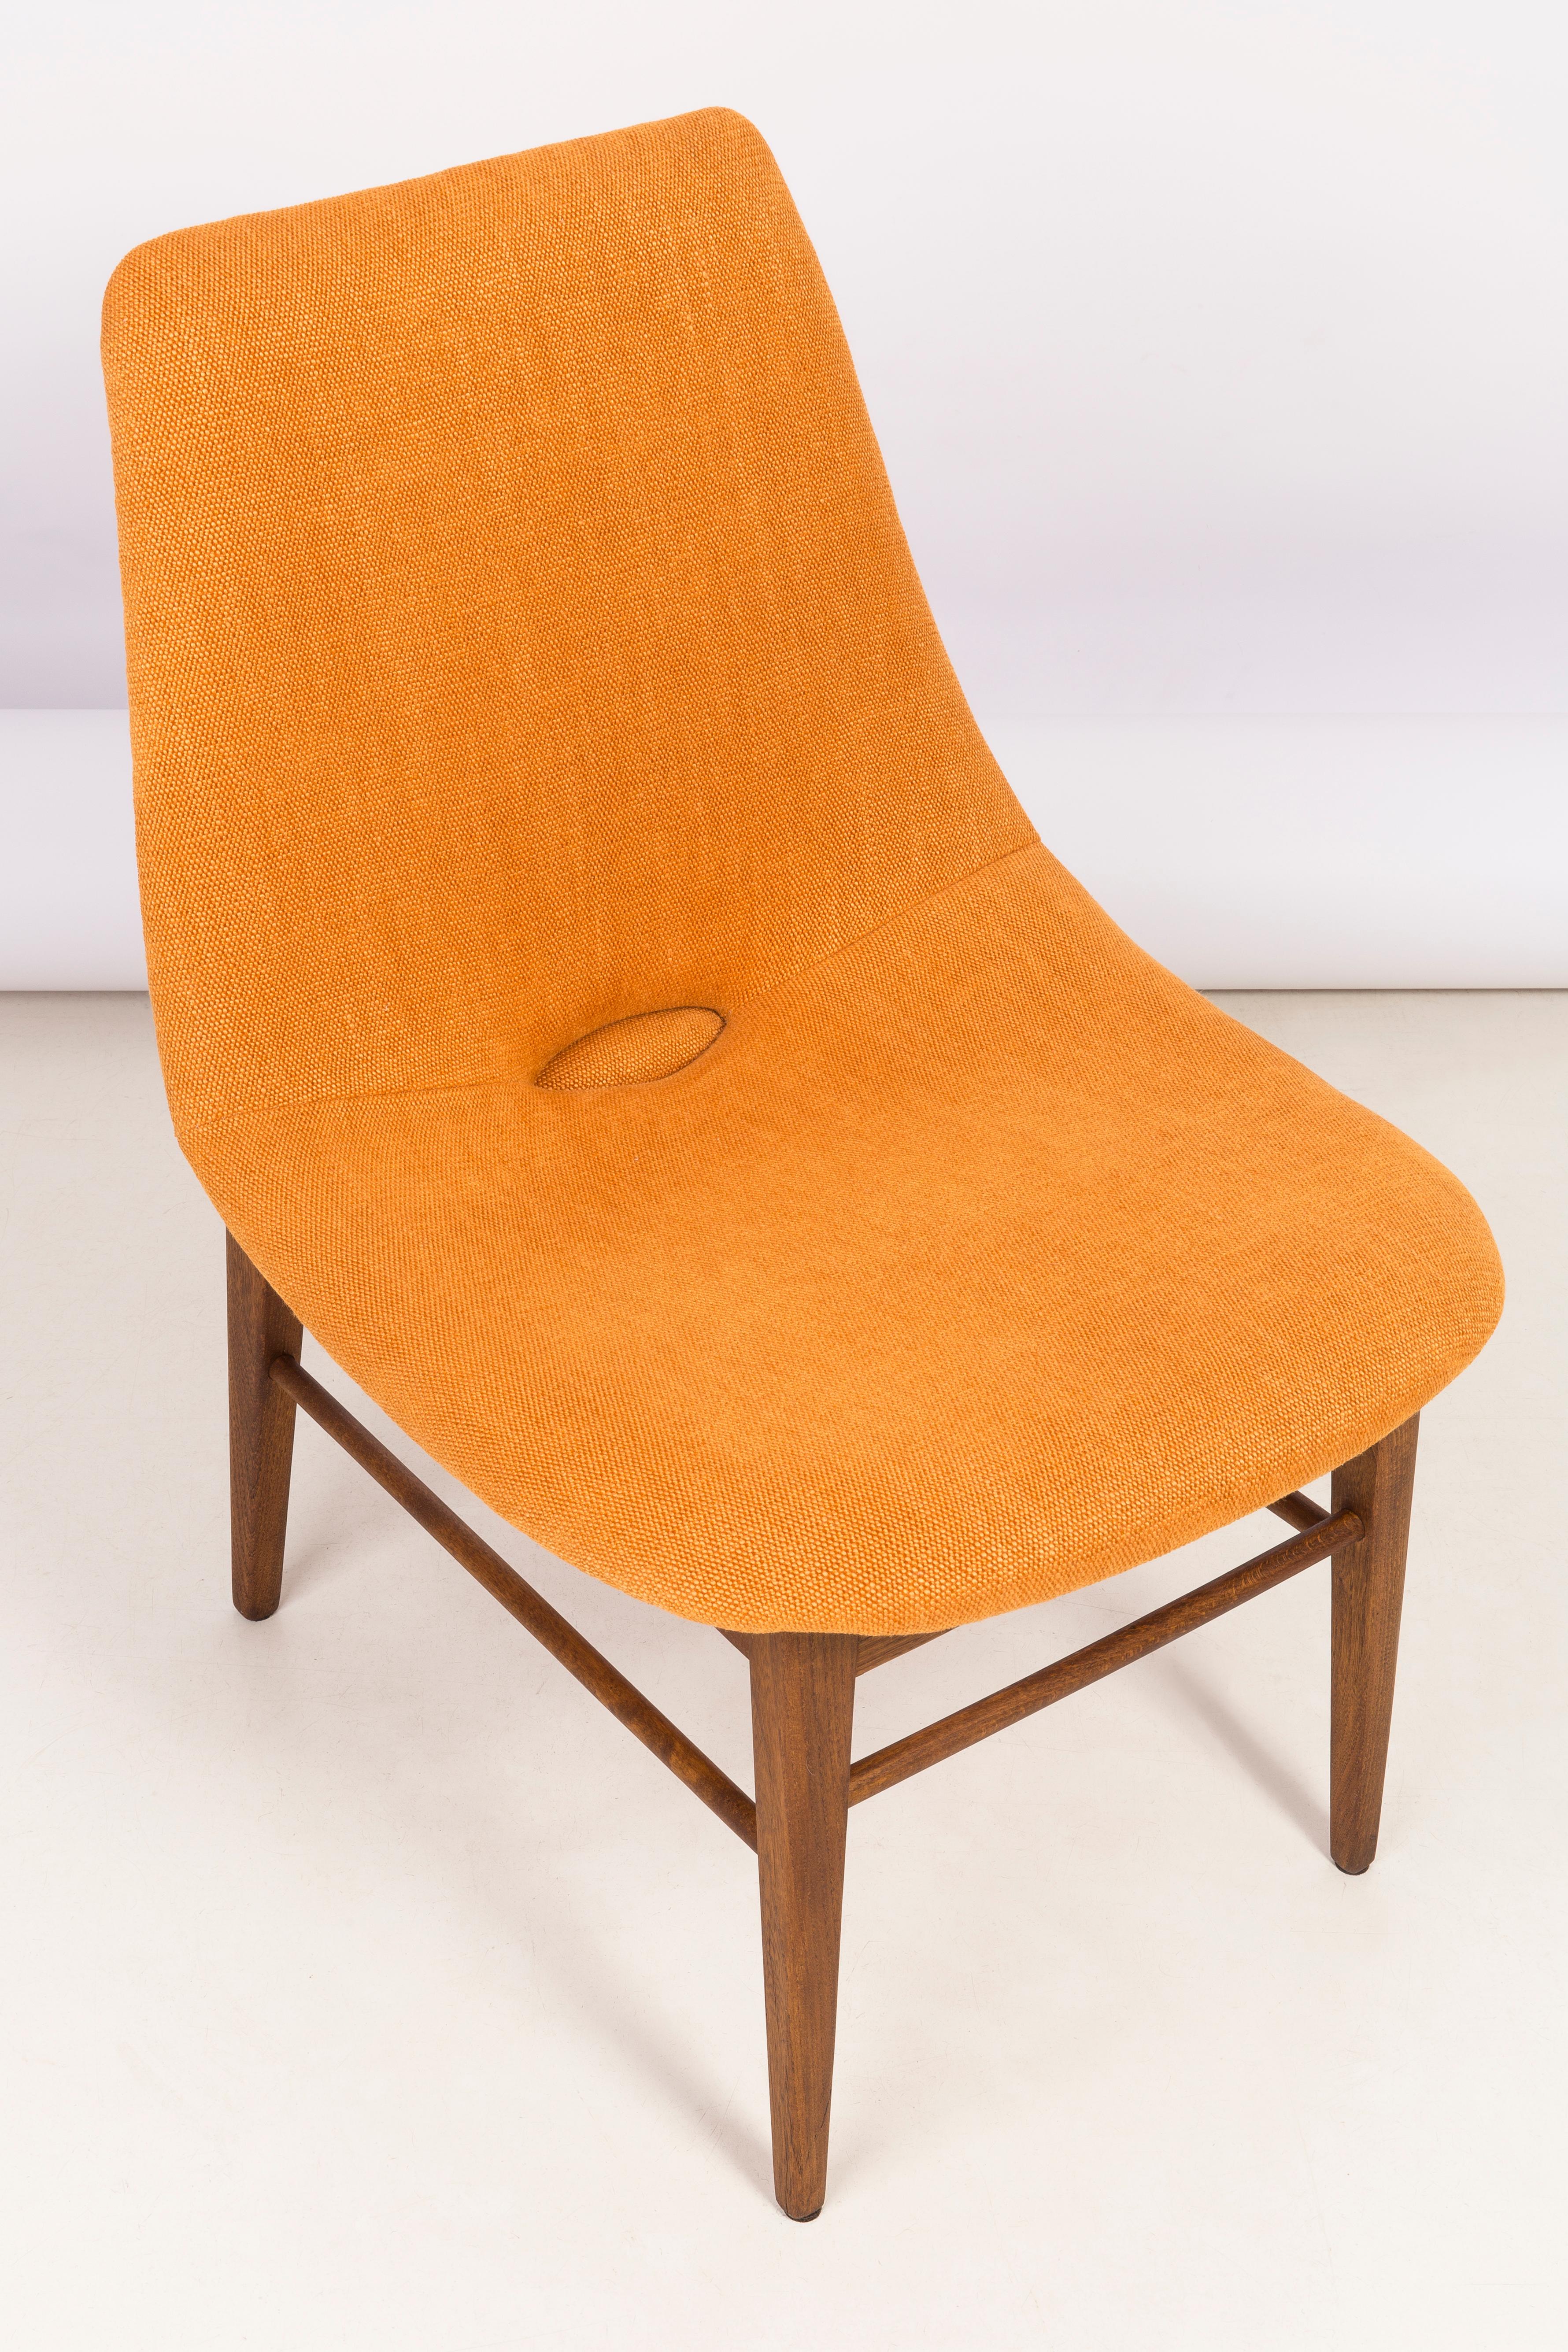 Set of Two Rare 20th Century Orange Shell Chairs, H. Lachert, 1960s For Sale 9